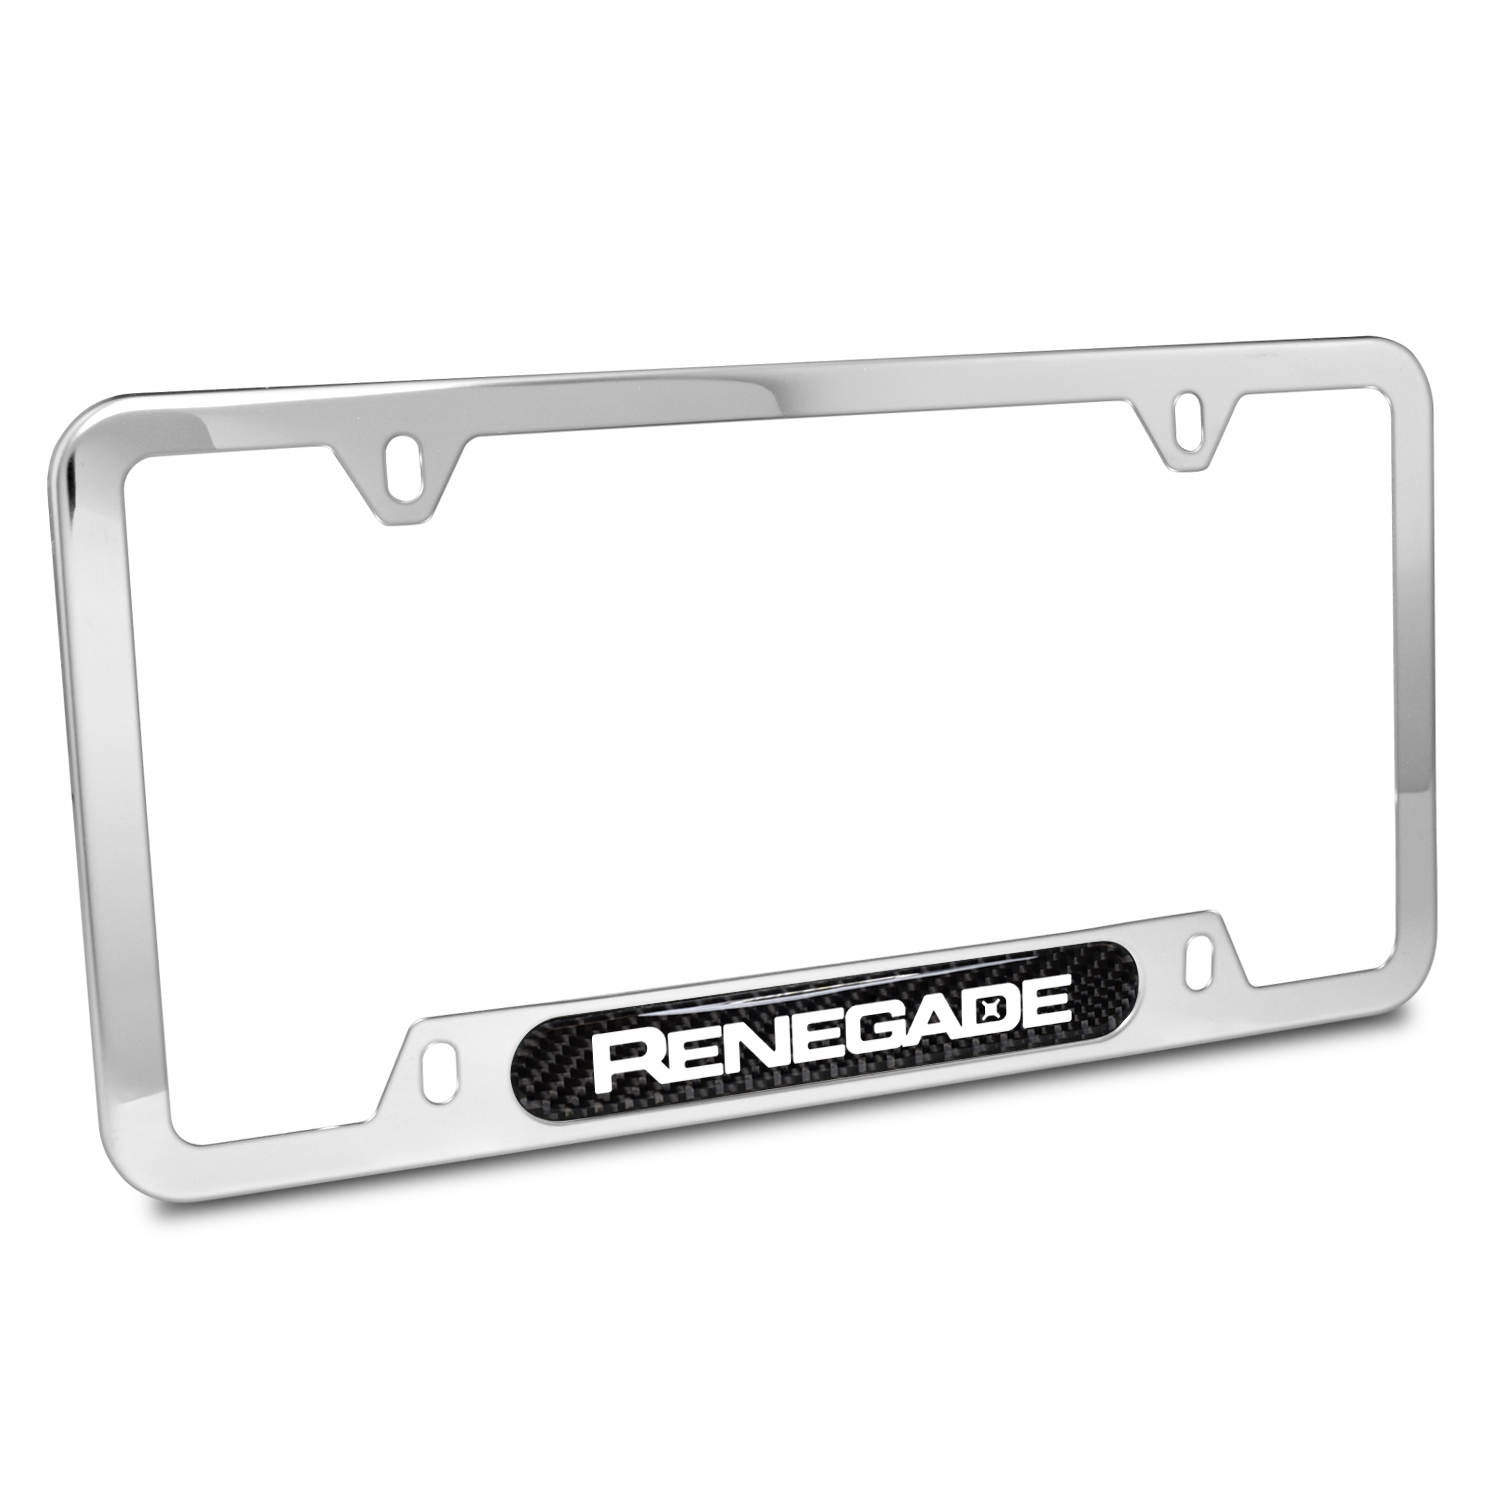 Jeep Renegade Real Carbon Fiber Nameplate Chrome Stainless Steel License Plate Frame